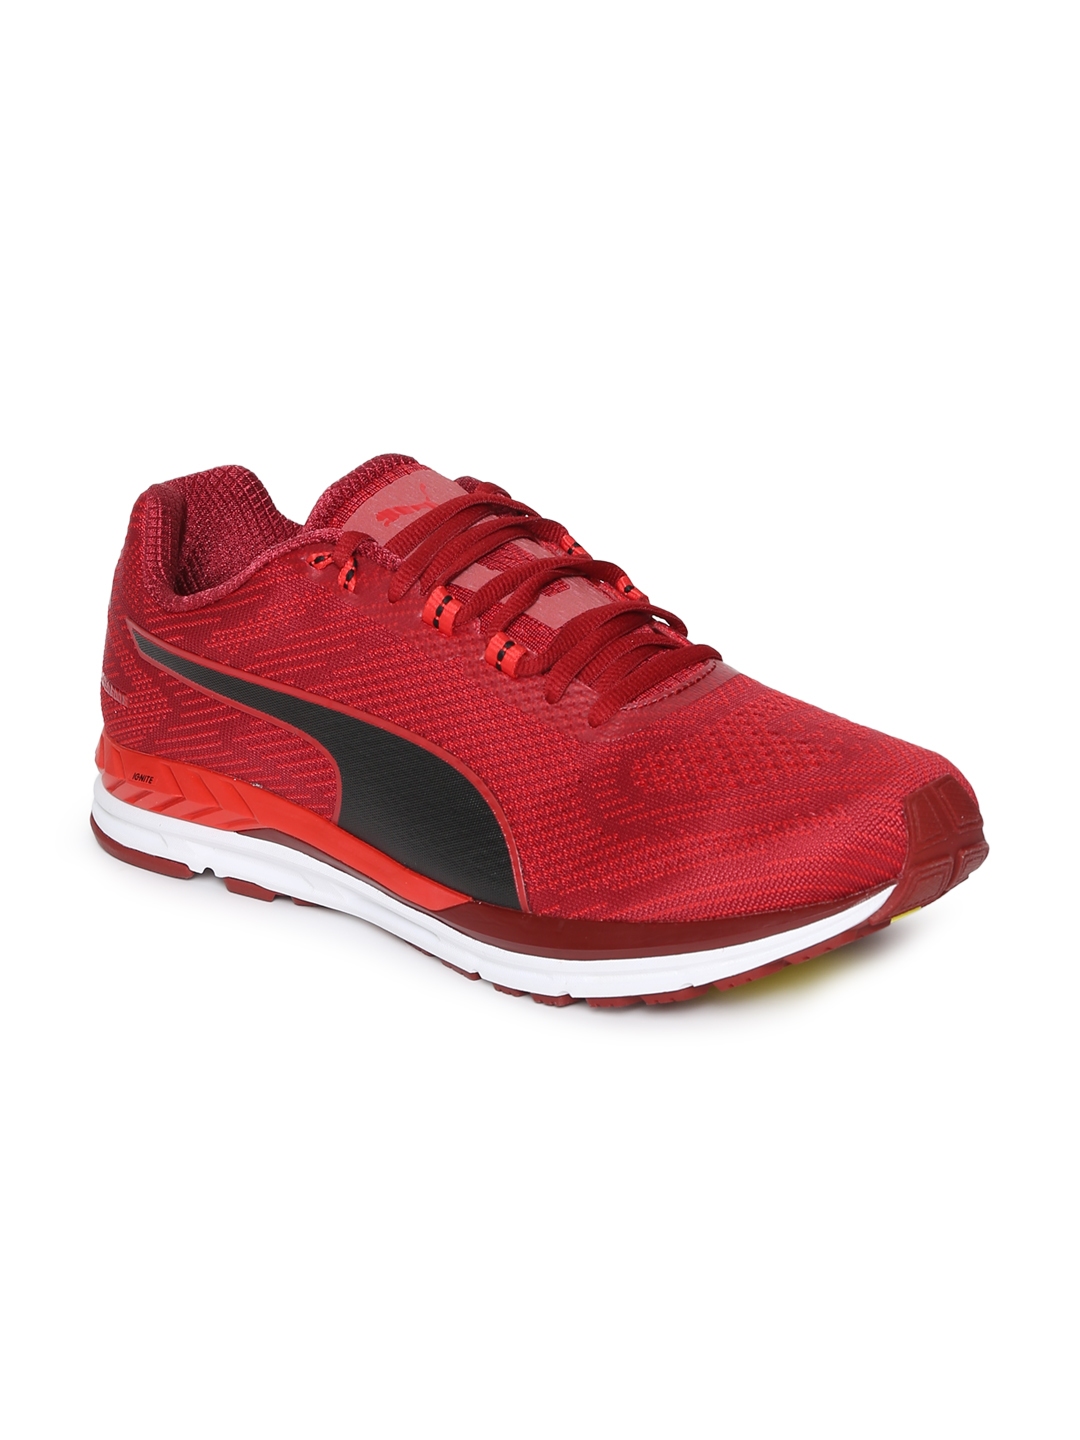 Buy Puma Men Red Speed S IGNITE Running Shoes - Sports Shoes for Men 6703215 | Myntra